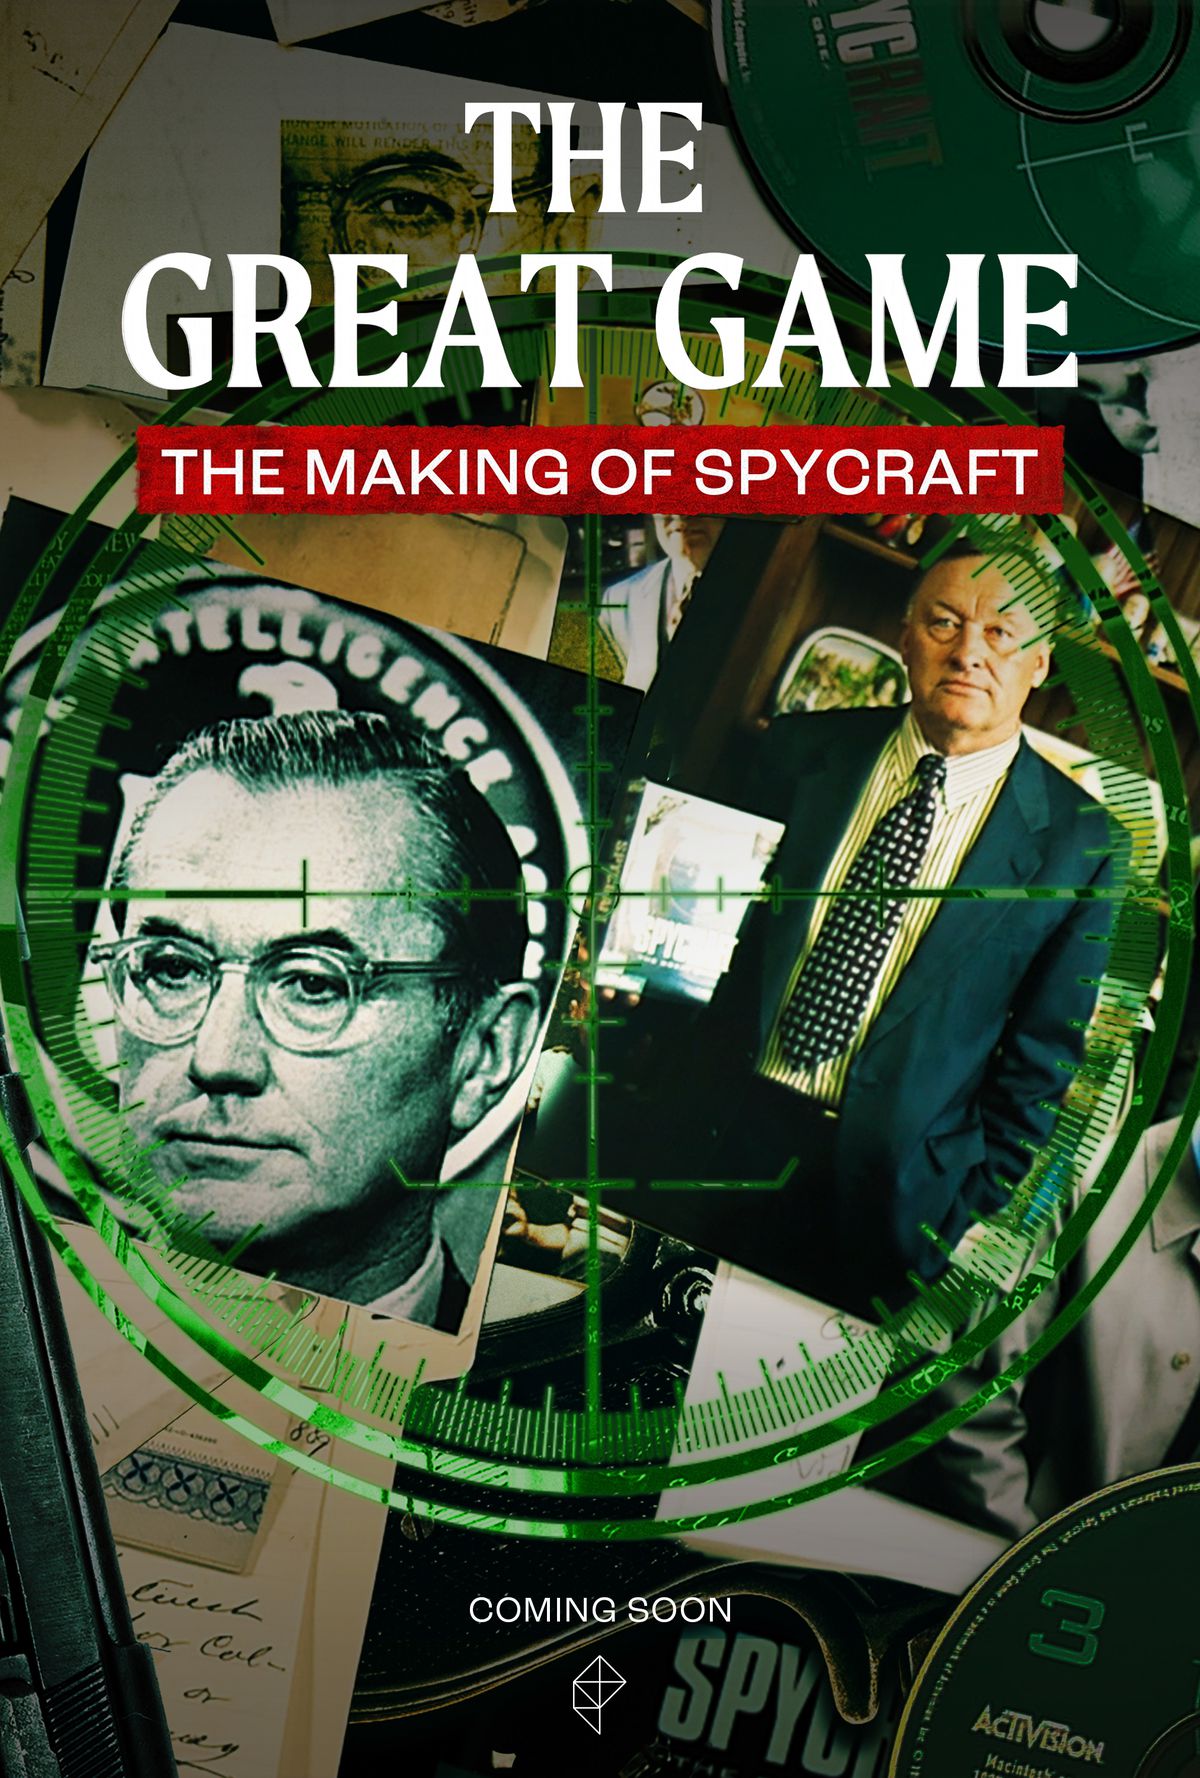 A poster for The Great Game: The Making of Spycraft. Many photos, papers, and ephermera laid on a black table, with a large green target laid over it.